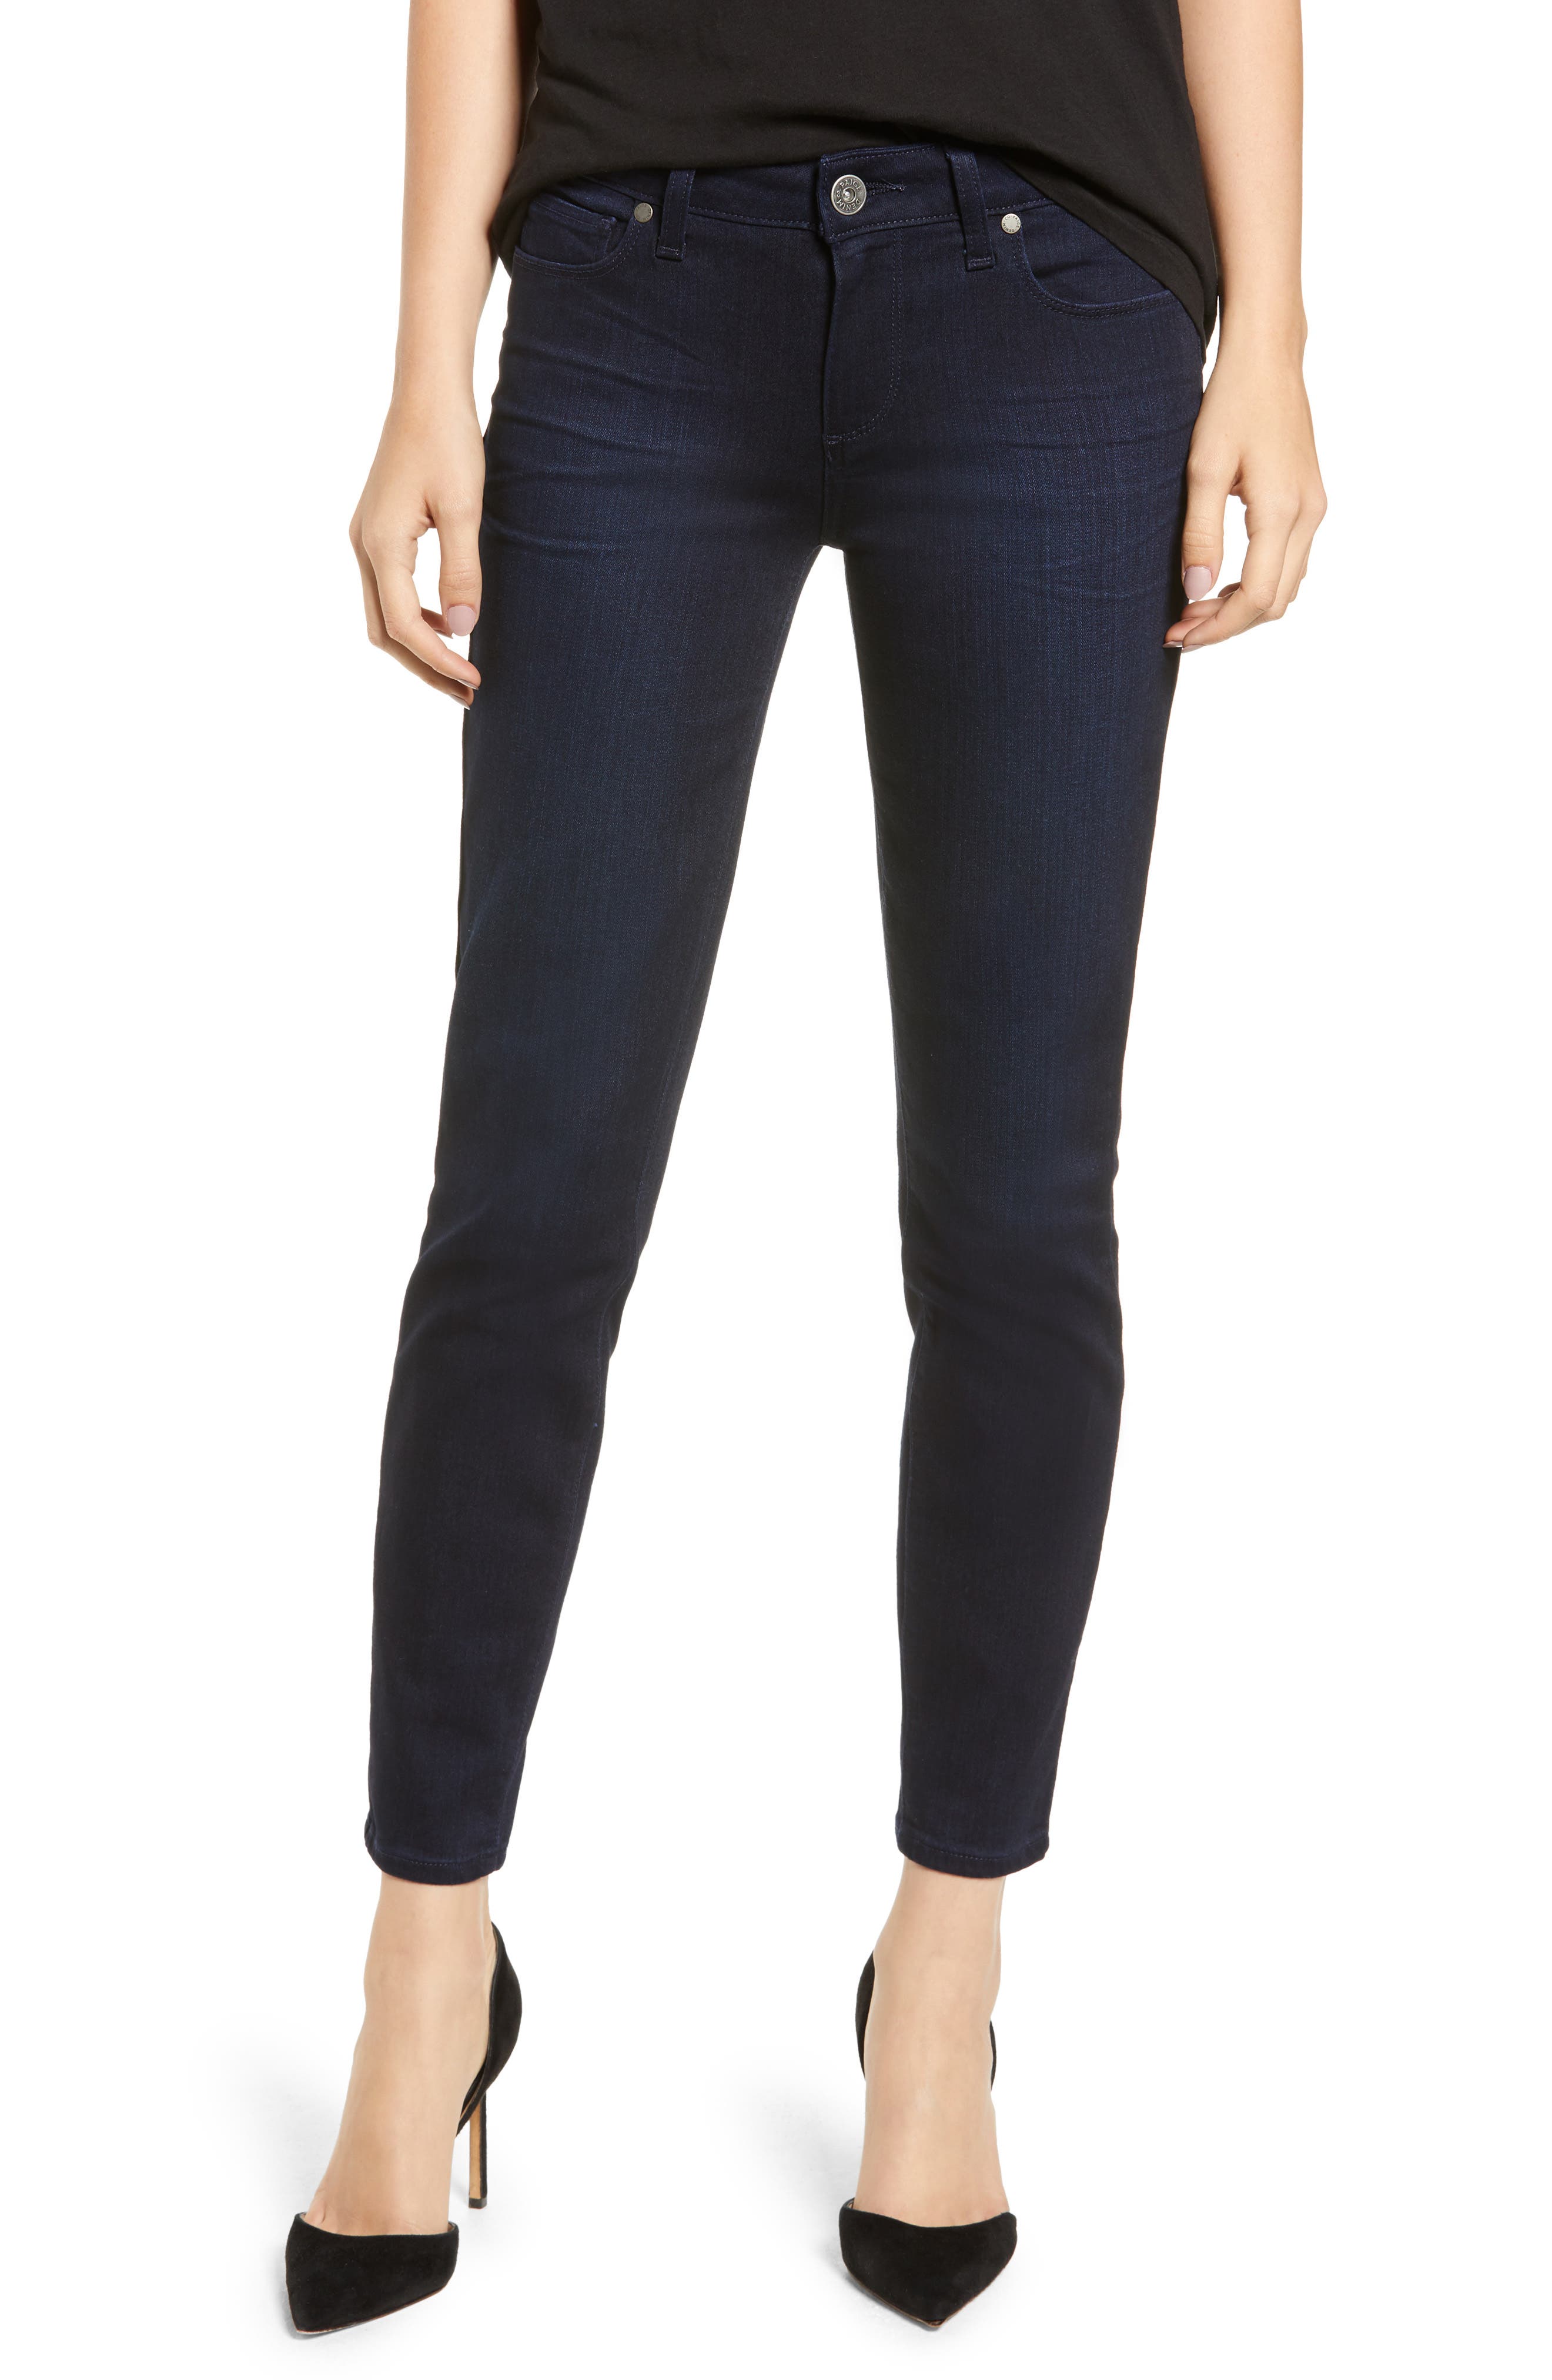 paige hoxton ultra skinny jeans